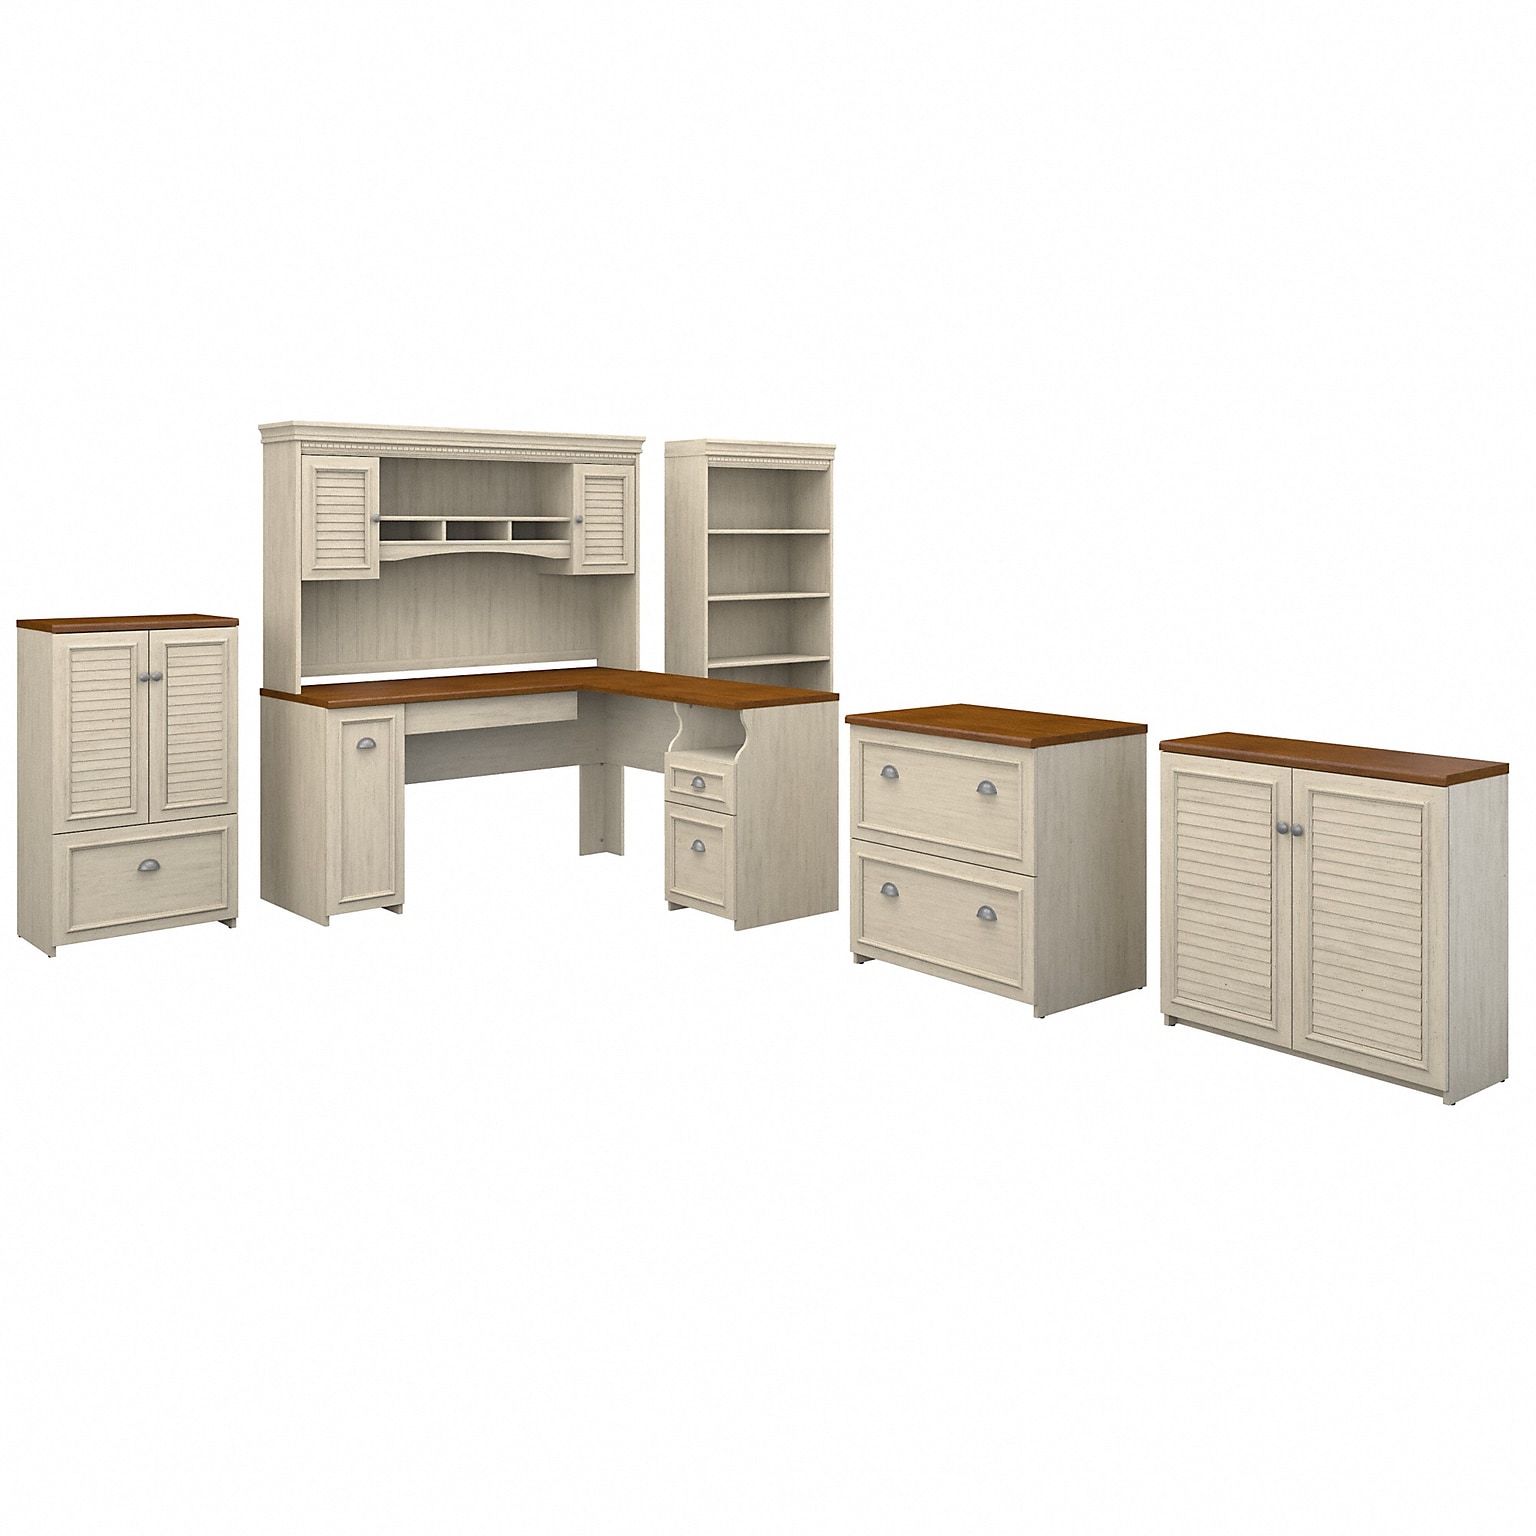 Bush Furniture Fairview 60W L Shaped Desk with Hutch, Bookcase, Storage and File Cabinets, Antique White/Tea Maple (FV014AW)